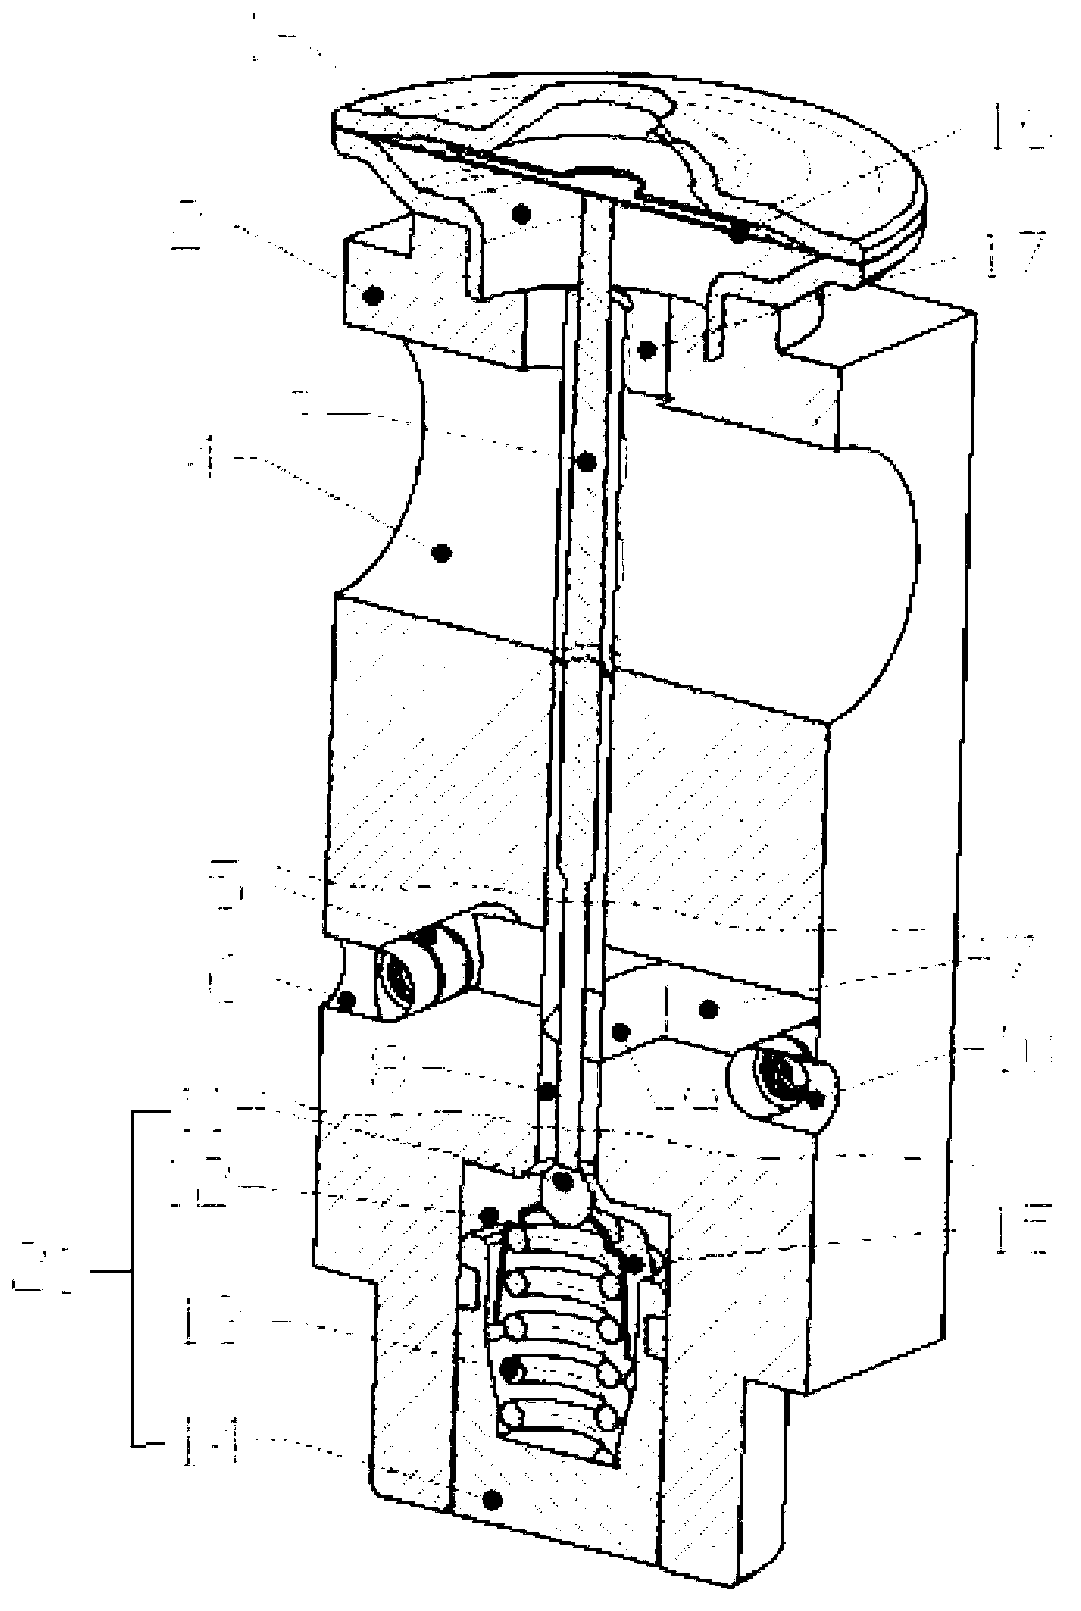 Expansion valve having two-way valve functions